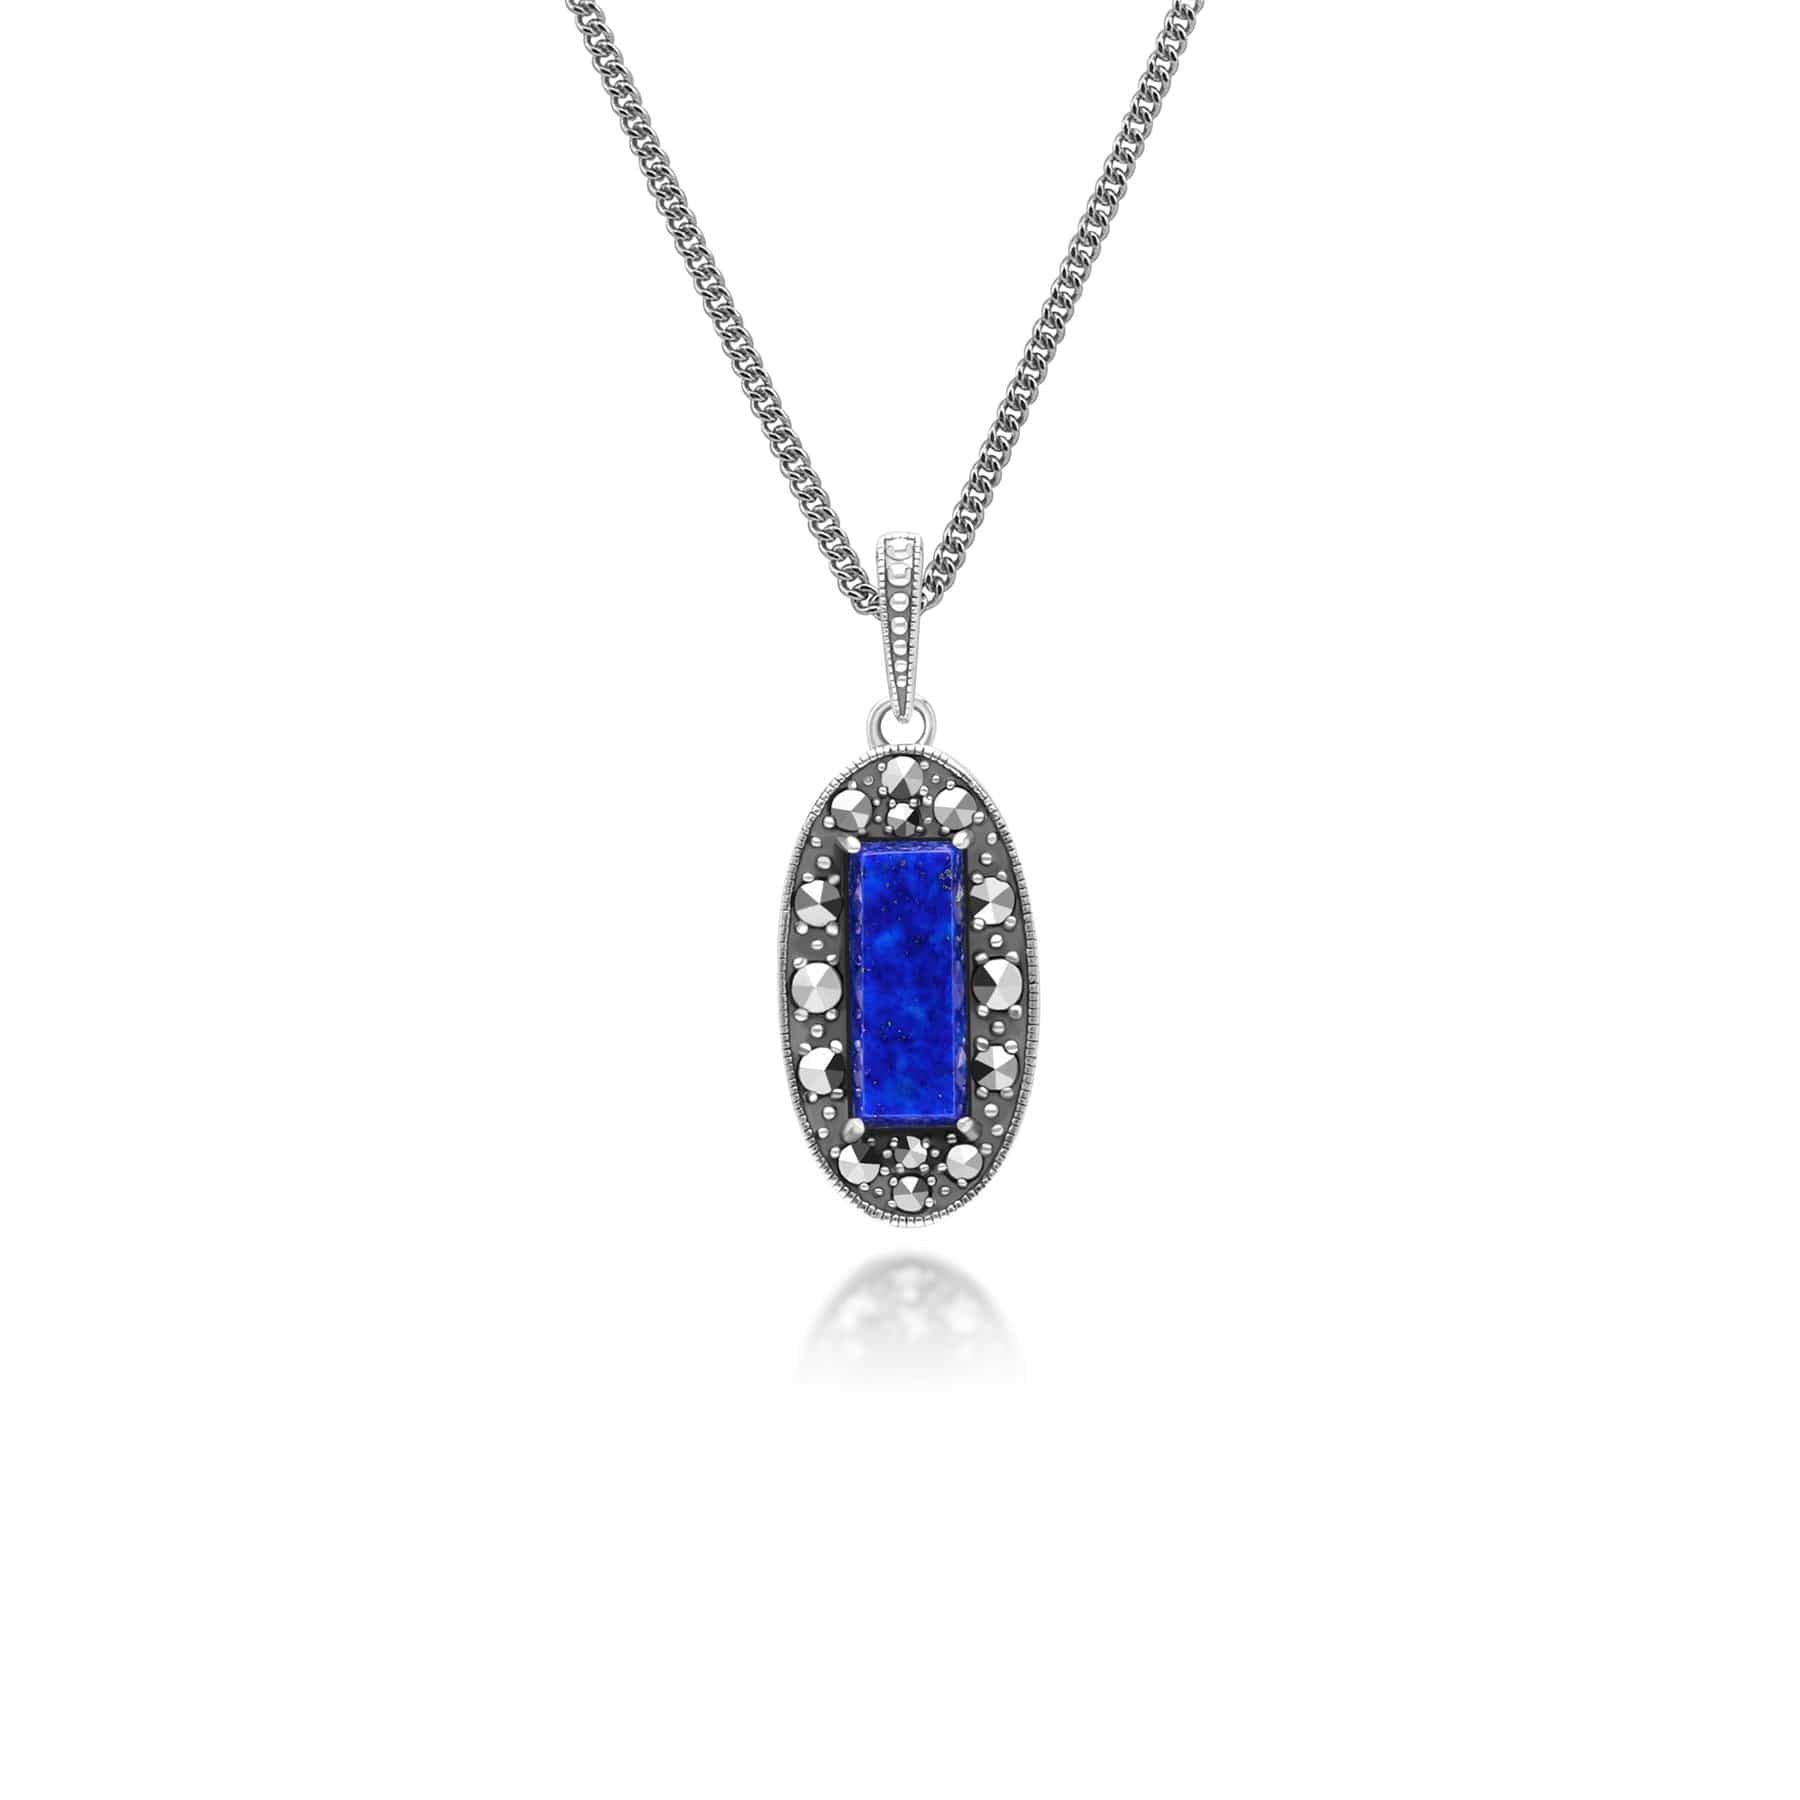 Art Deco Style Oval Lapis Lazuli and Marcasite Pendant Necklace in Sterling Silver 214P334301925 